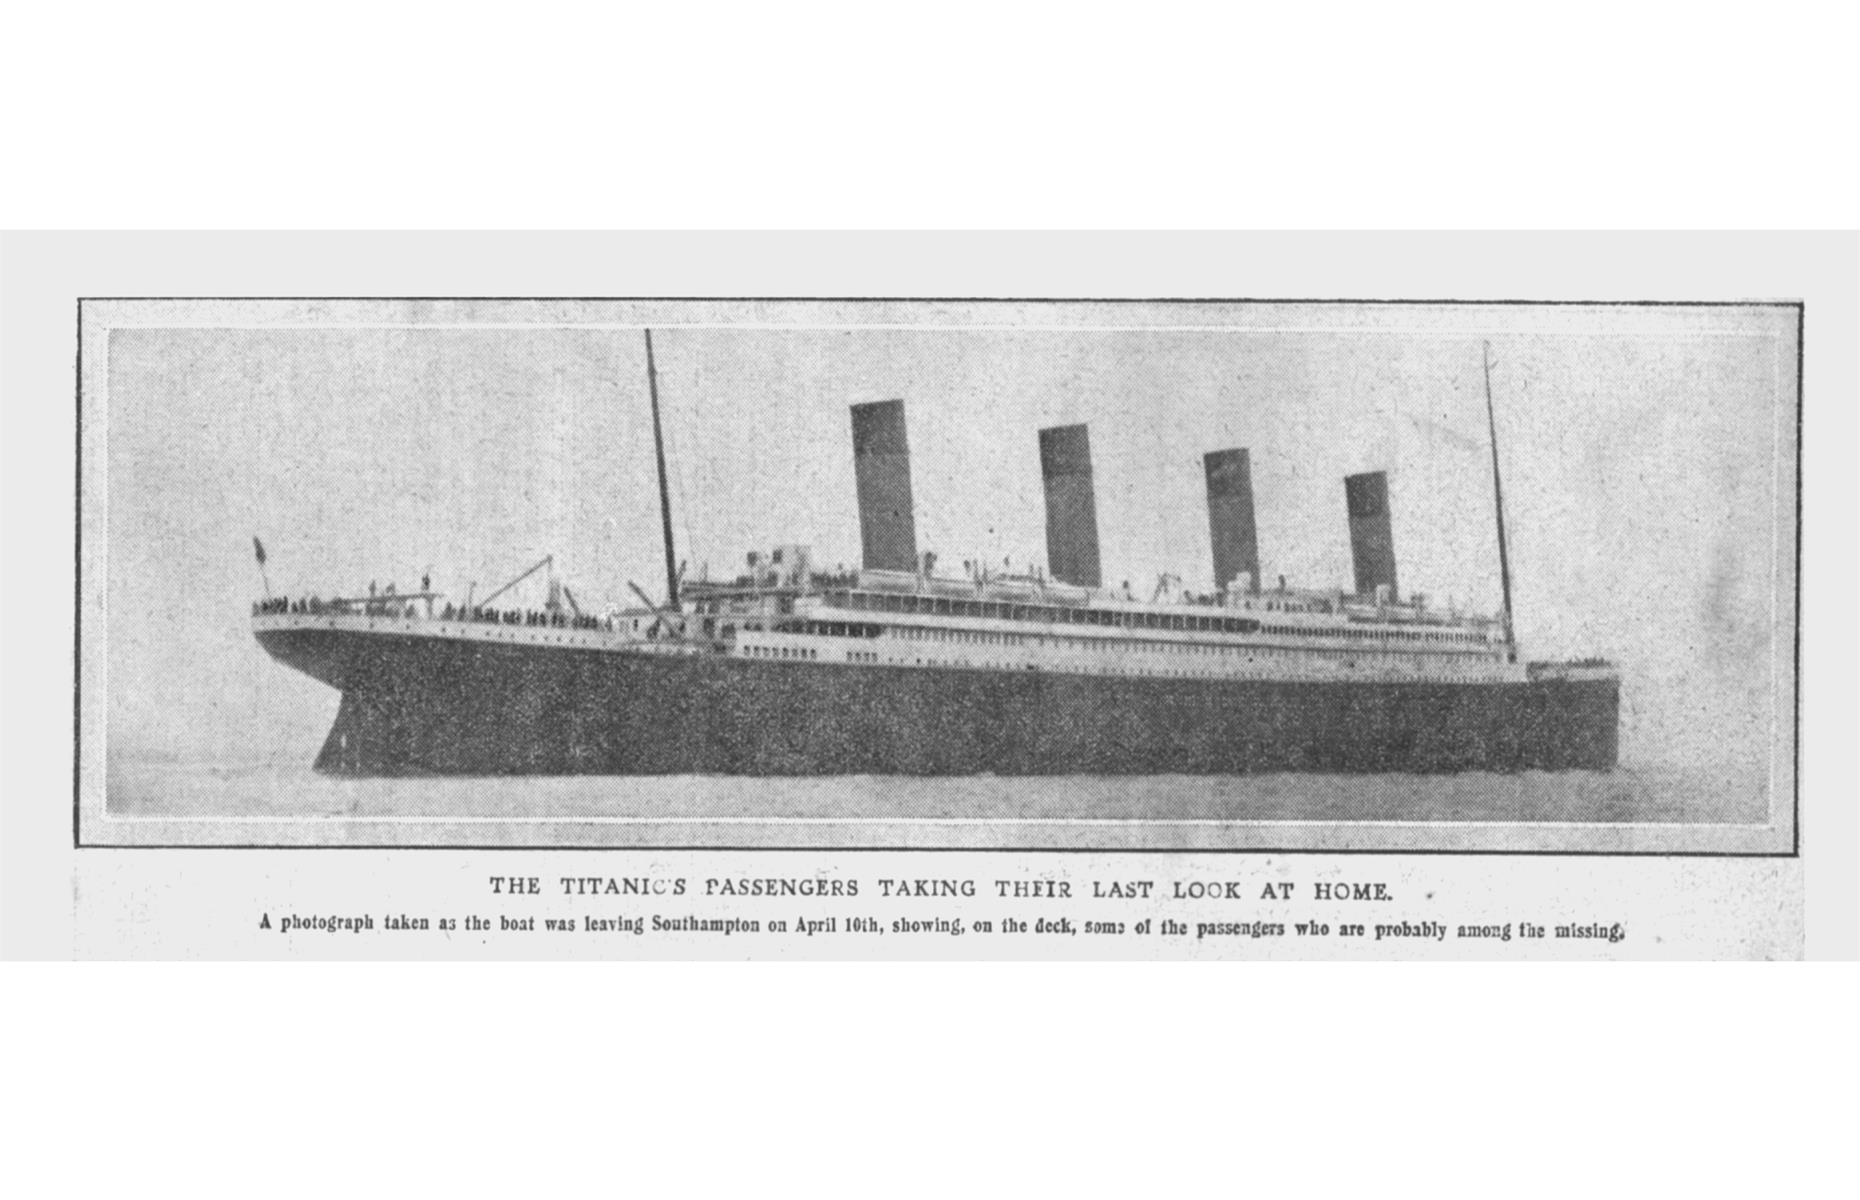 The richest people who sailed on the Titanic 